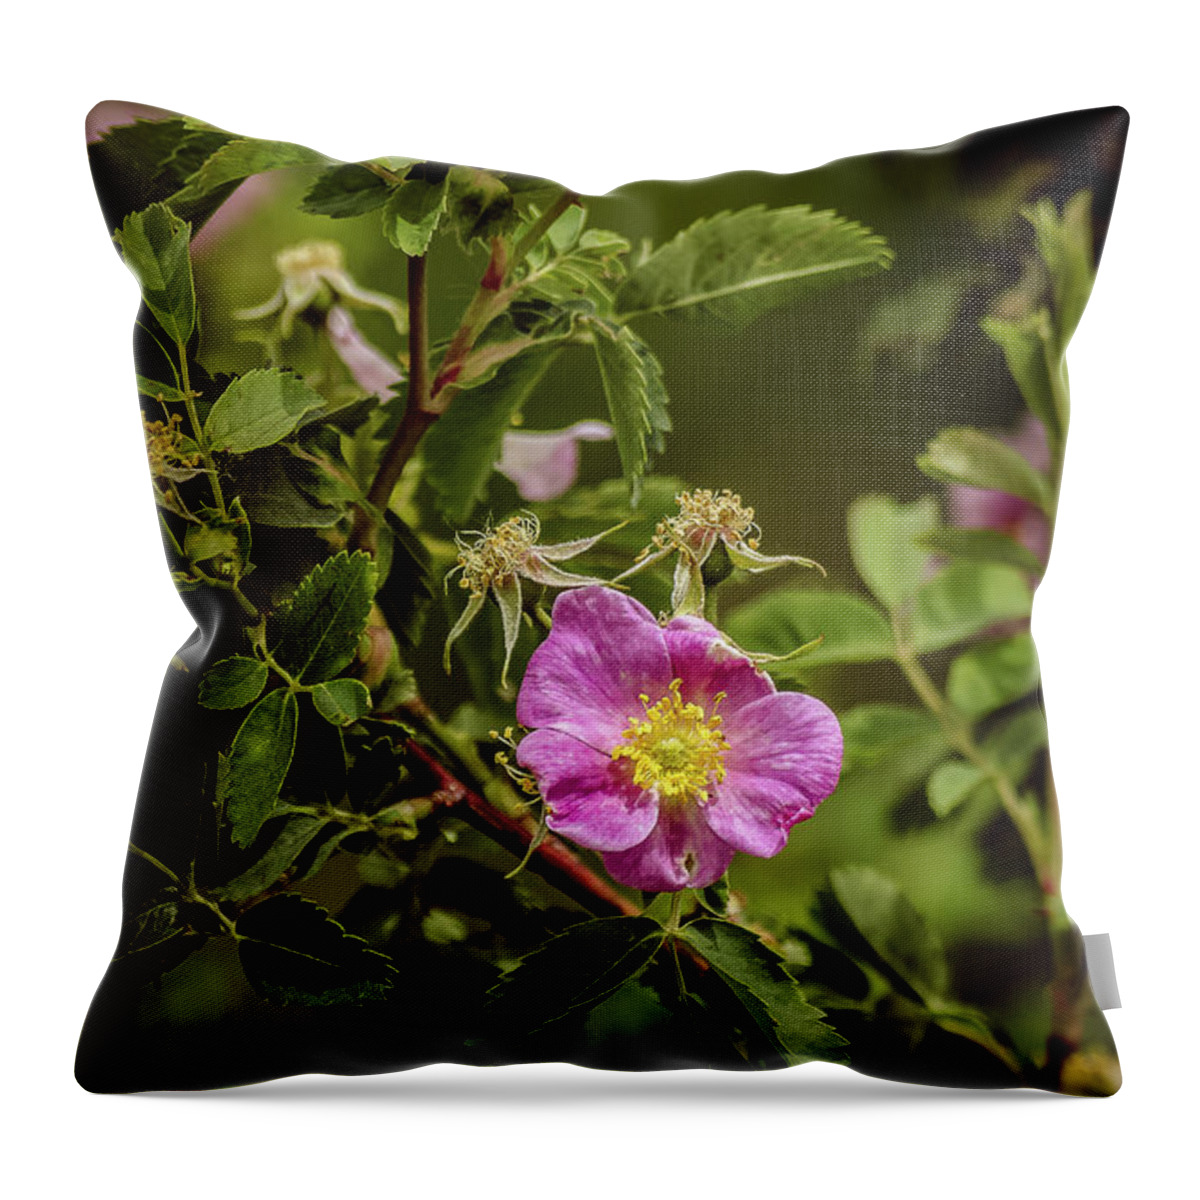 Summer Throw Pillow featuring the photograph Wild Roses Of Summer by Yeates Photography